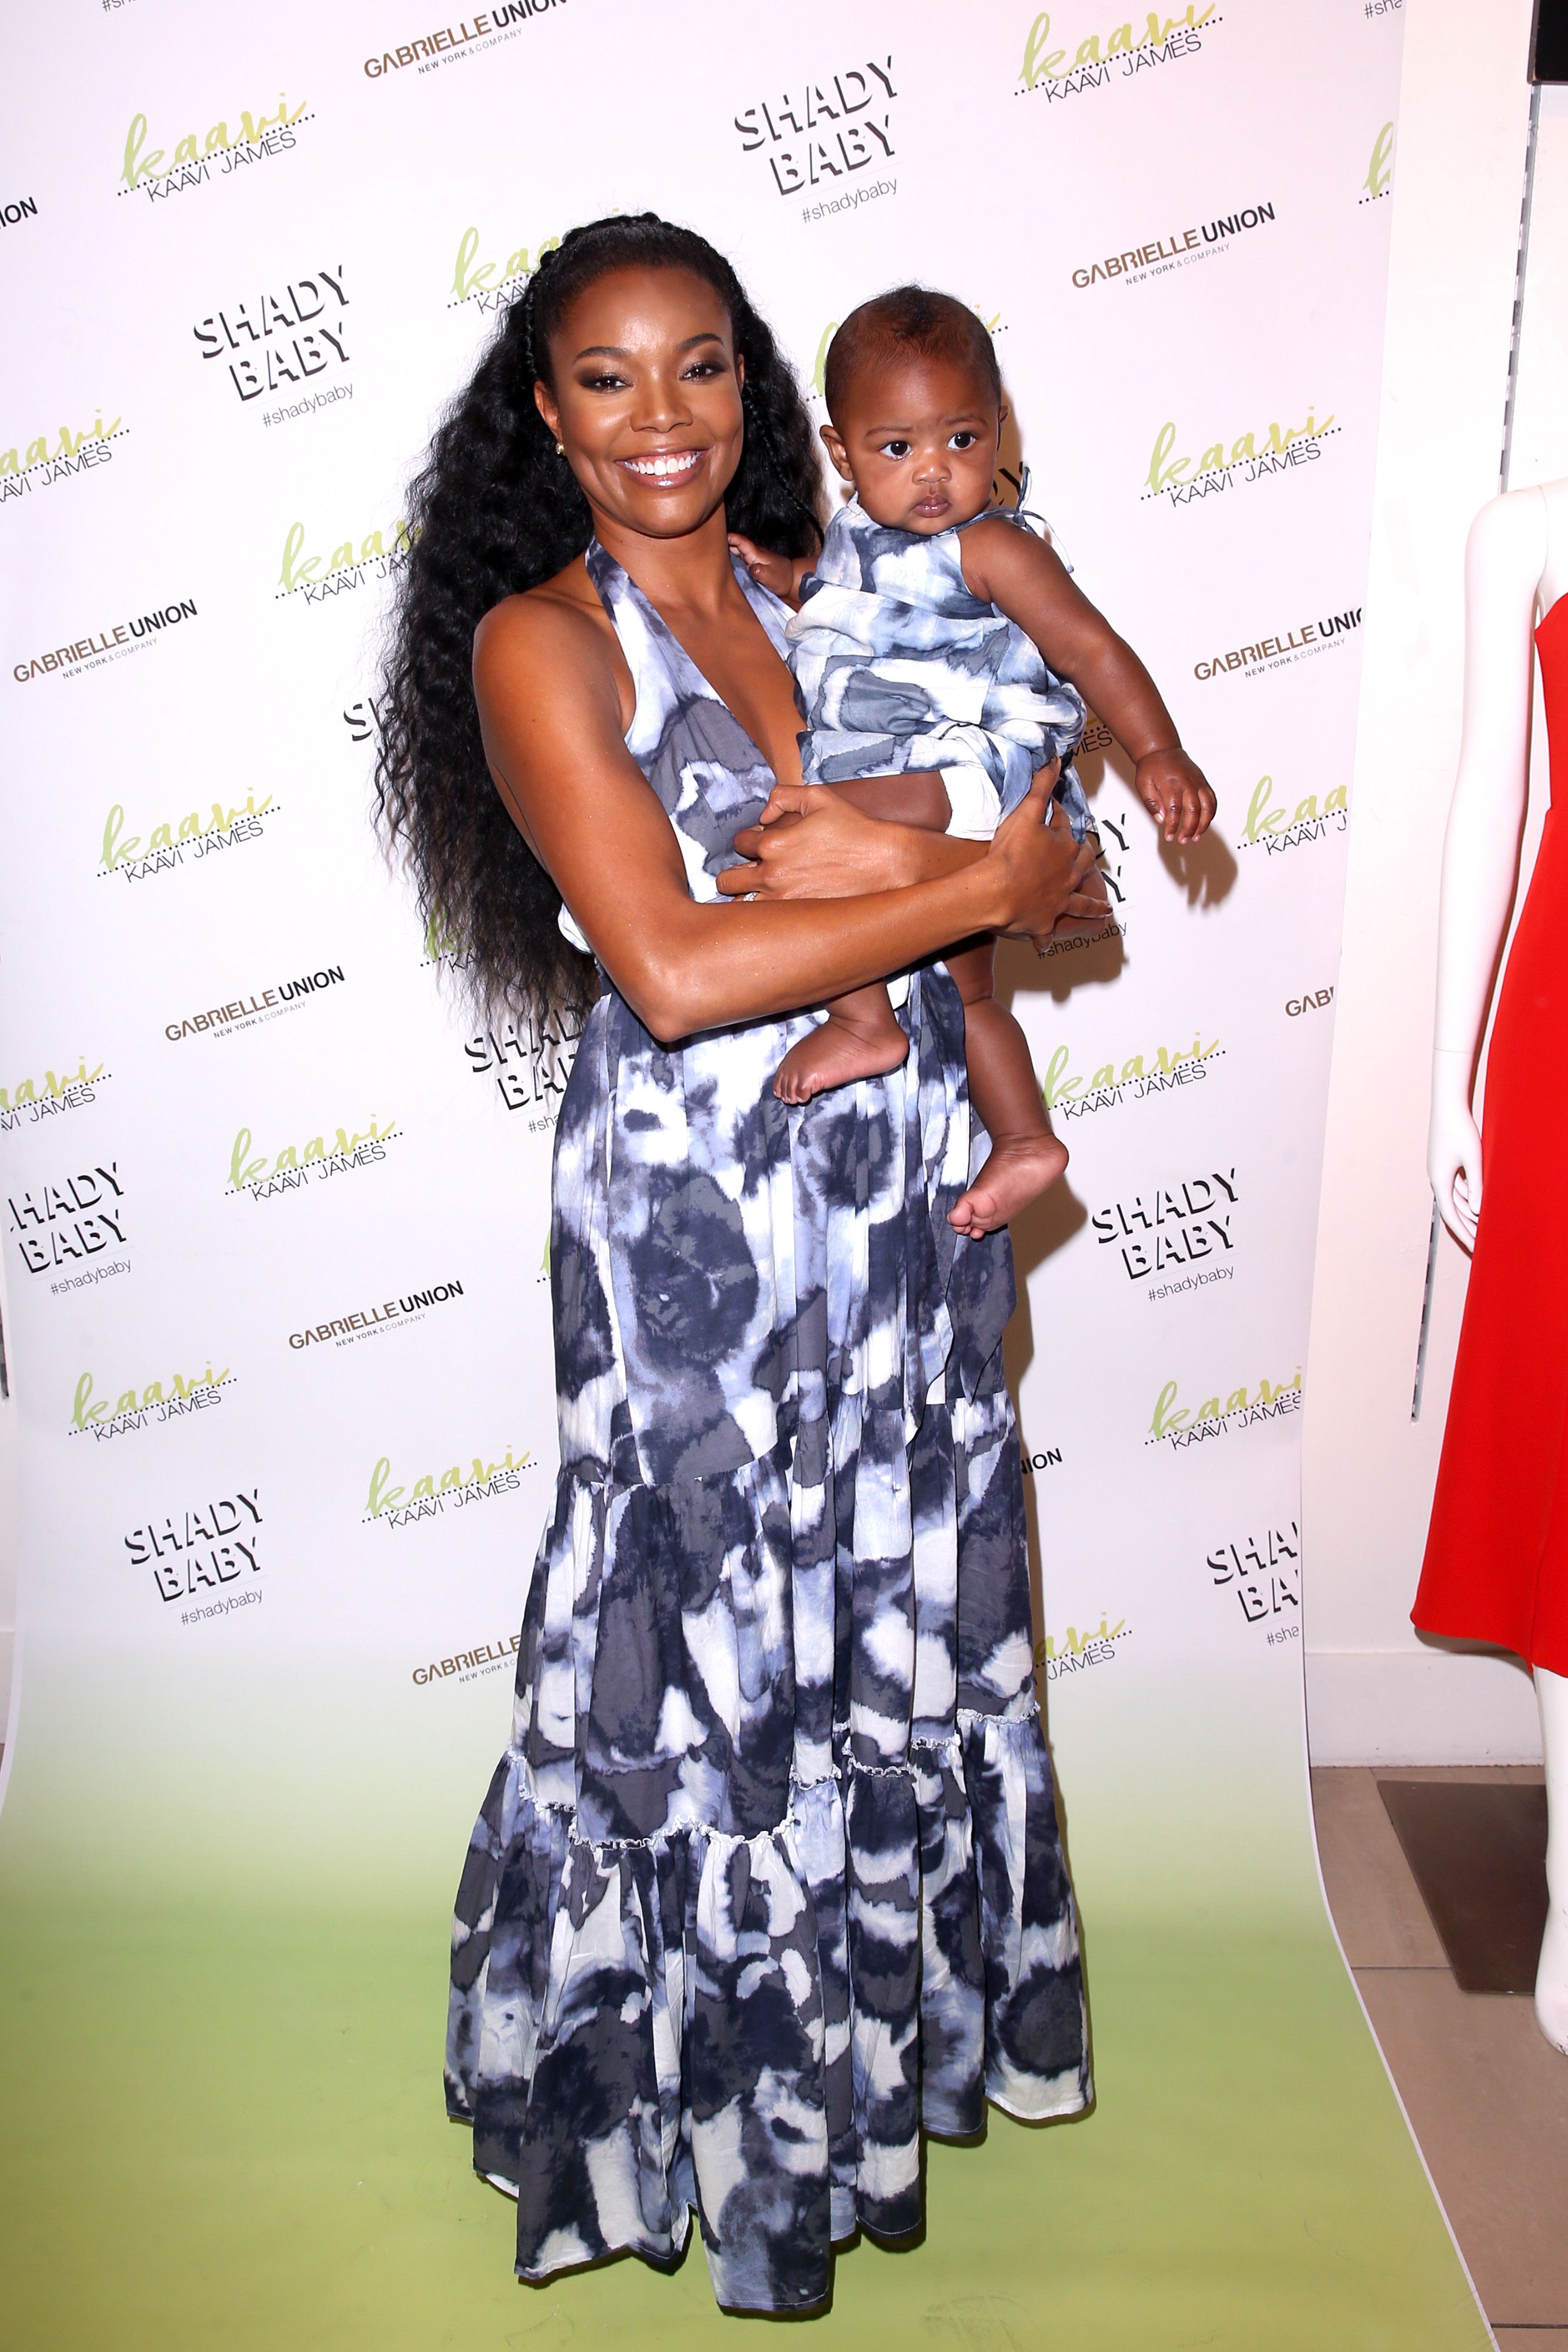 Kaavia James Union Wade and mother Gabrielle Union at New York & Company Store in Burbank launching Kaavi James Collection on May 09, 2019. | Photo: Getty Images